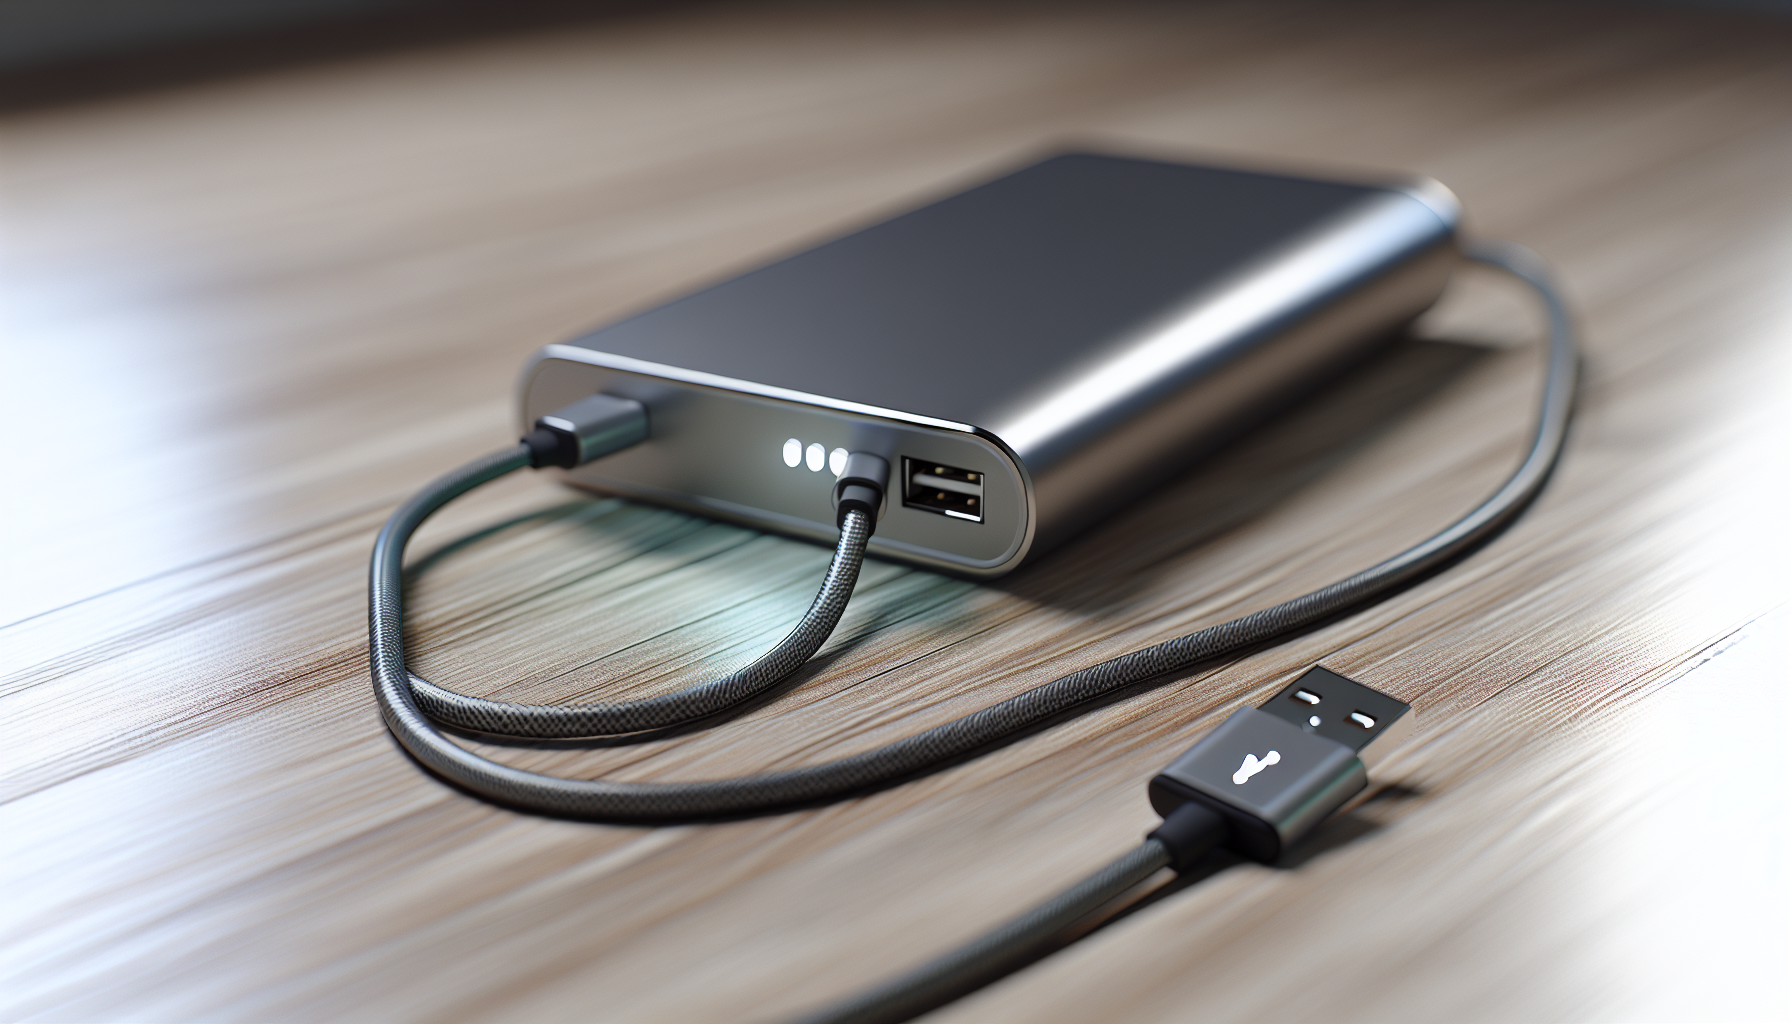 High-quality USB cable and power bank